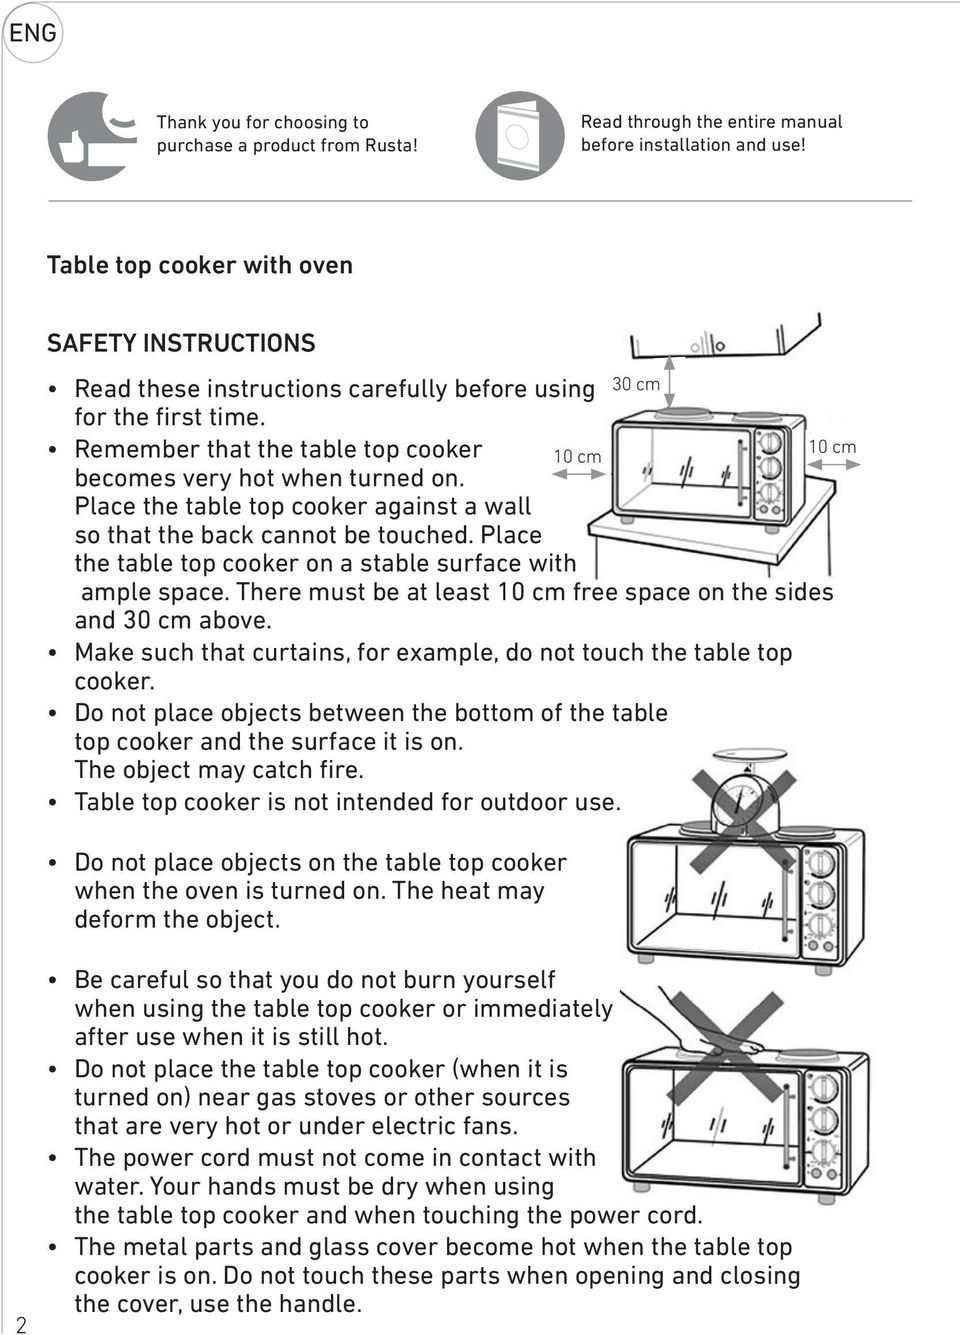 Place the table top cooker against a wall so that the back cannot be touched. Place the table top cooker on a stable surface with ample space.